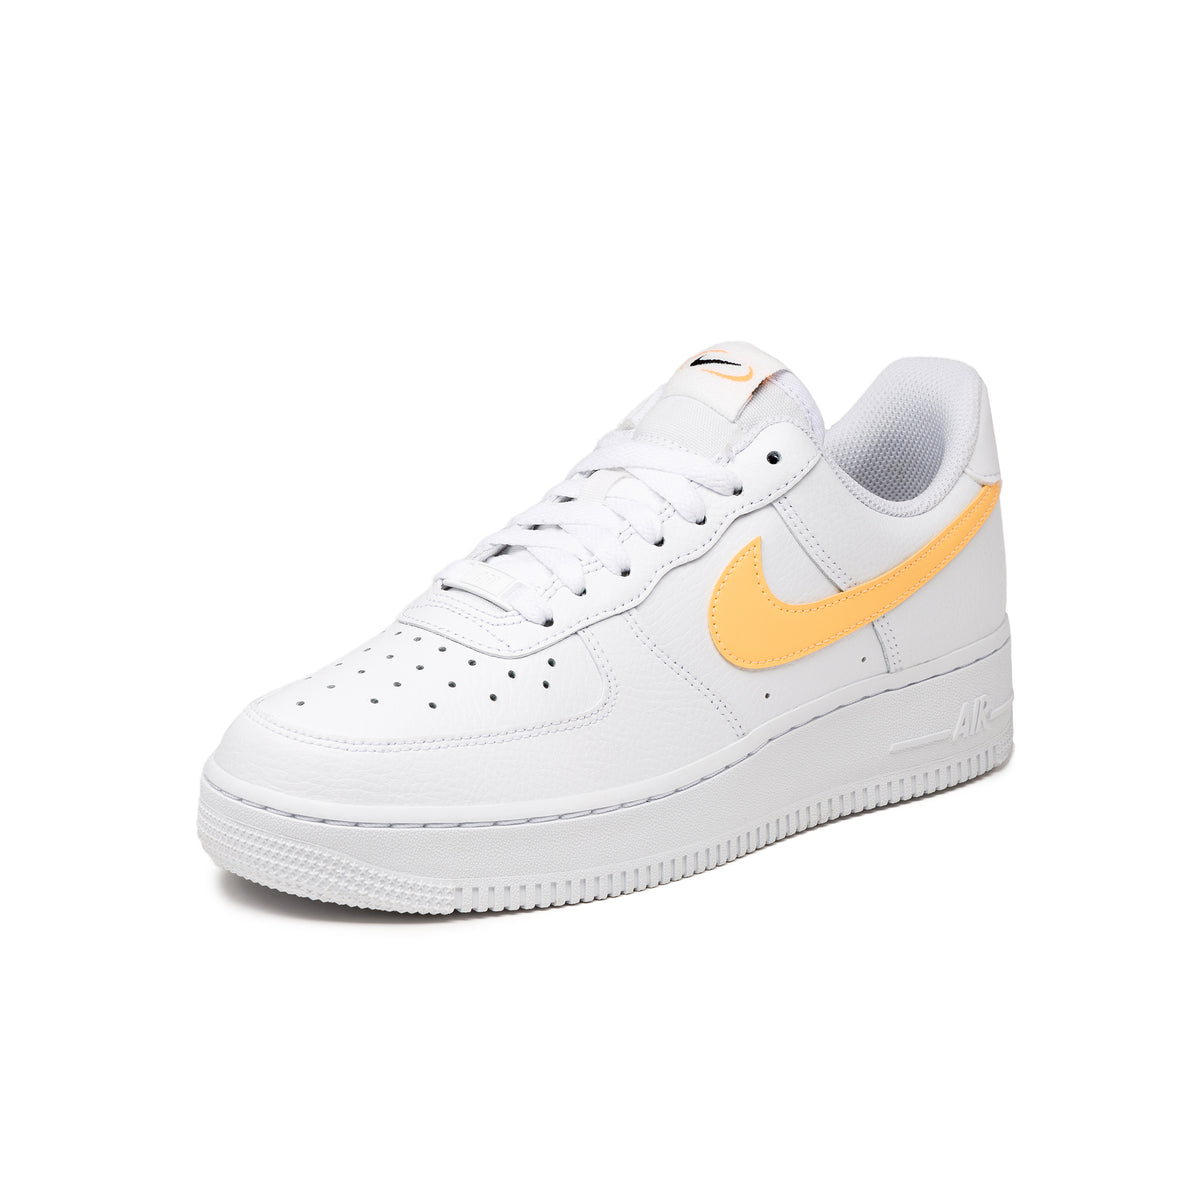 Nike Wmns Air Force 1 '07 » Buy online now!